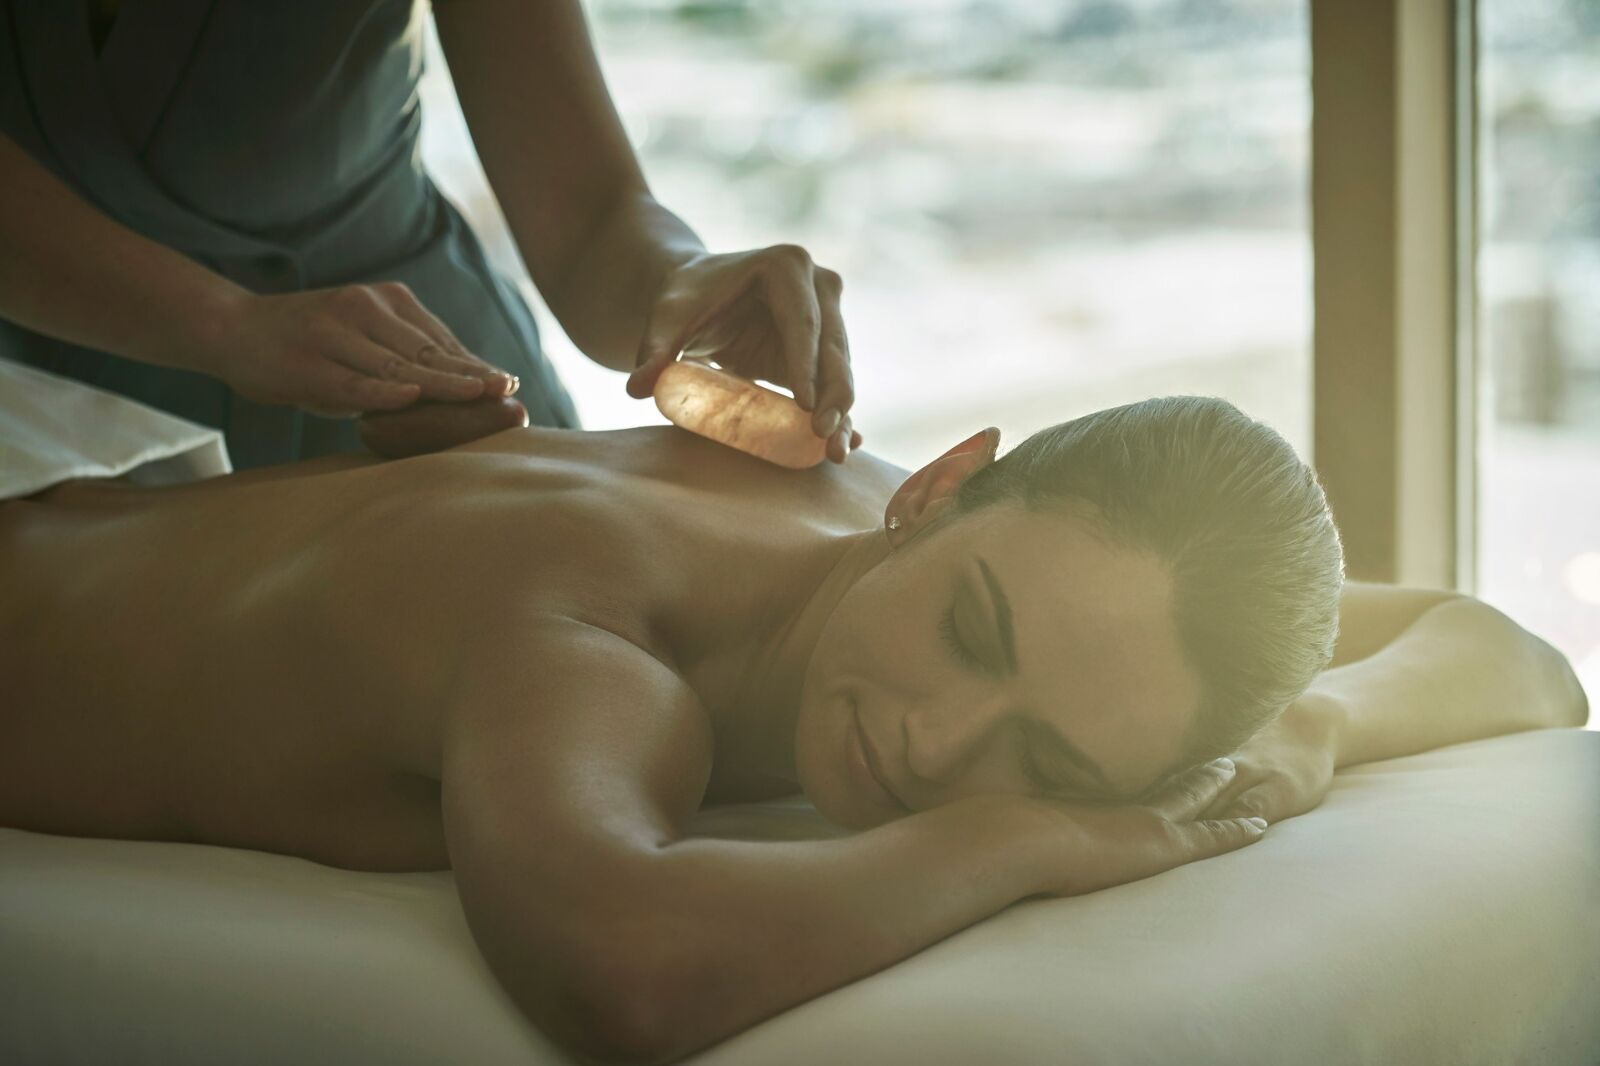 The Warm Salt Stone Ritual massage at The Spa at the Four Seasons on Las Vegas Spa weekend 